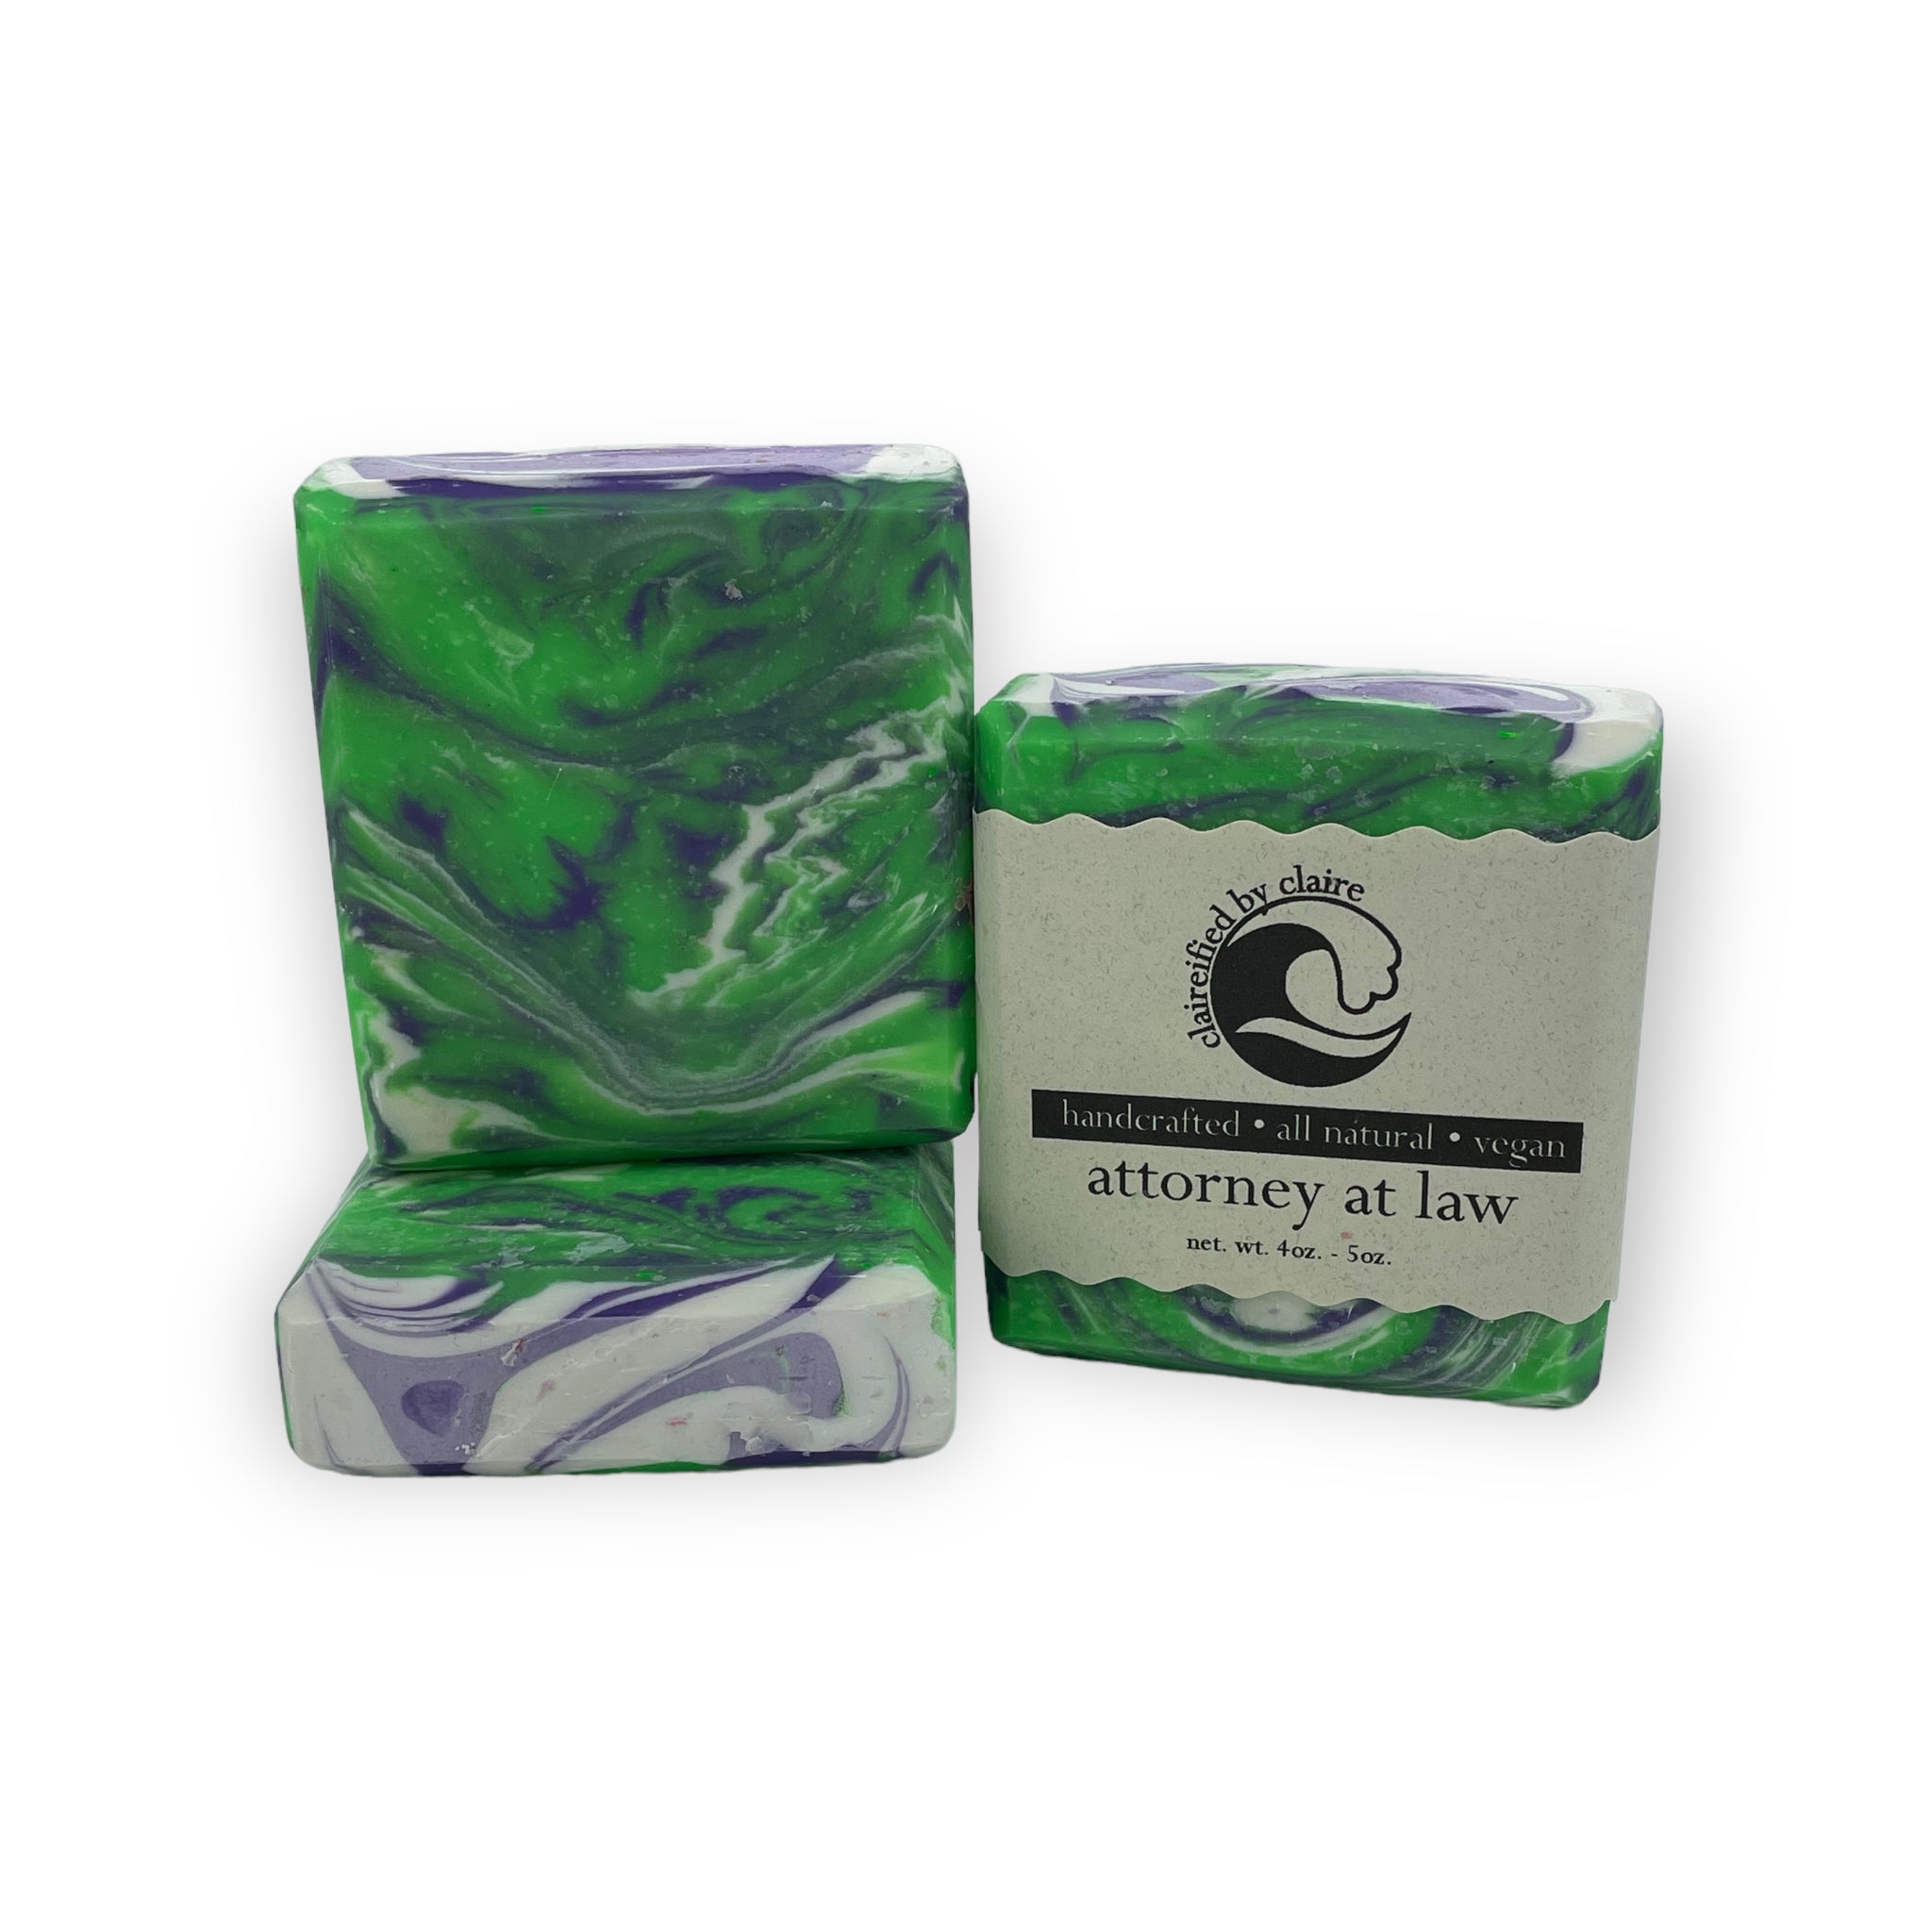 Attorney at Law Inspired by Marvel's She Hulk Handmade Soap - 0